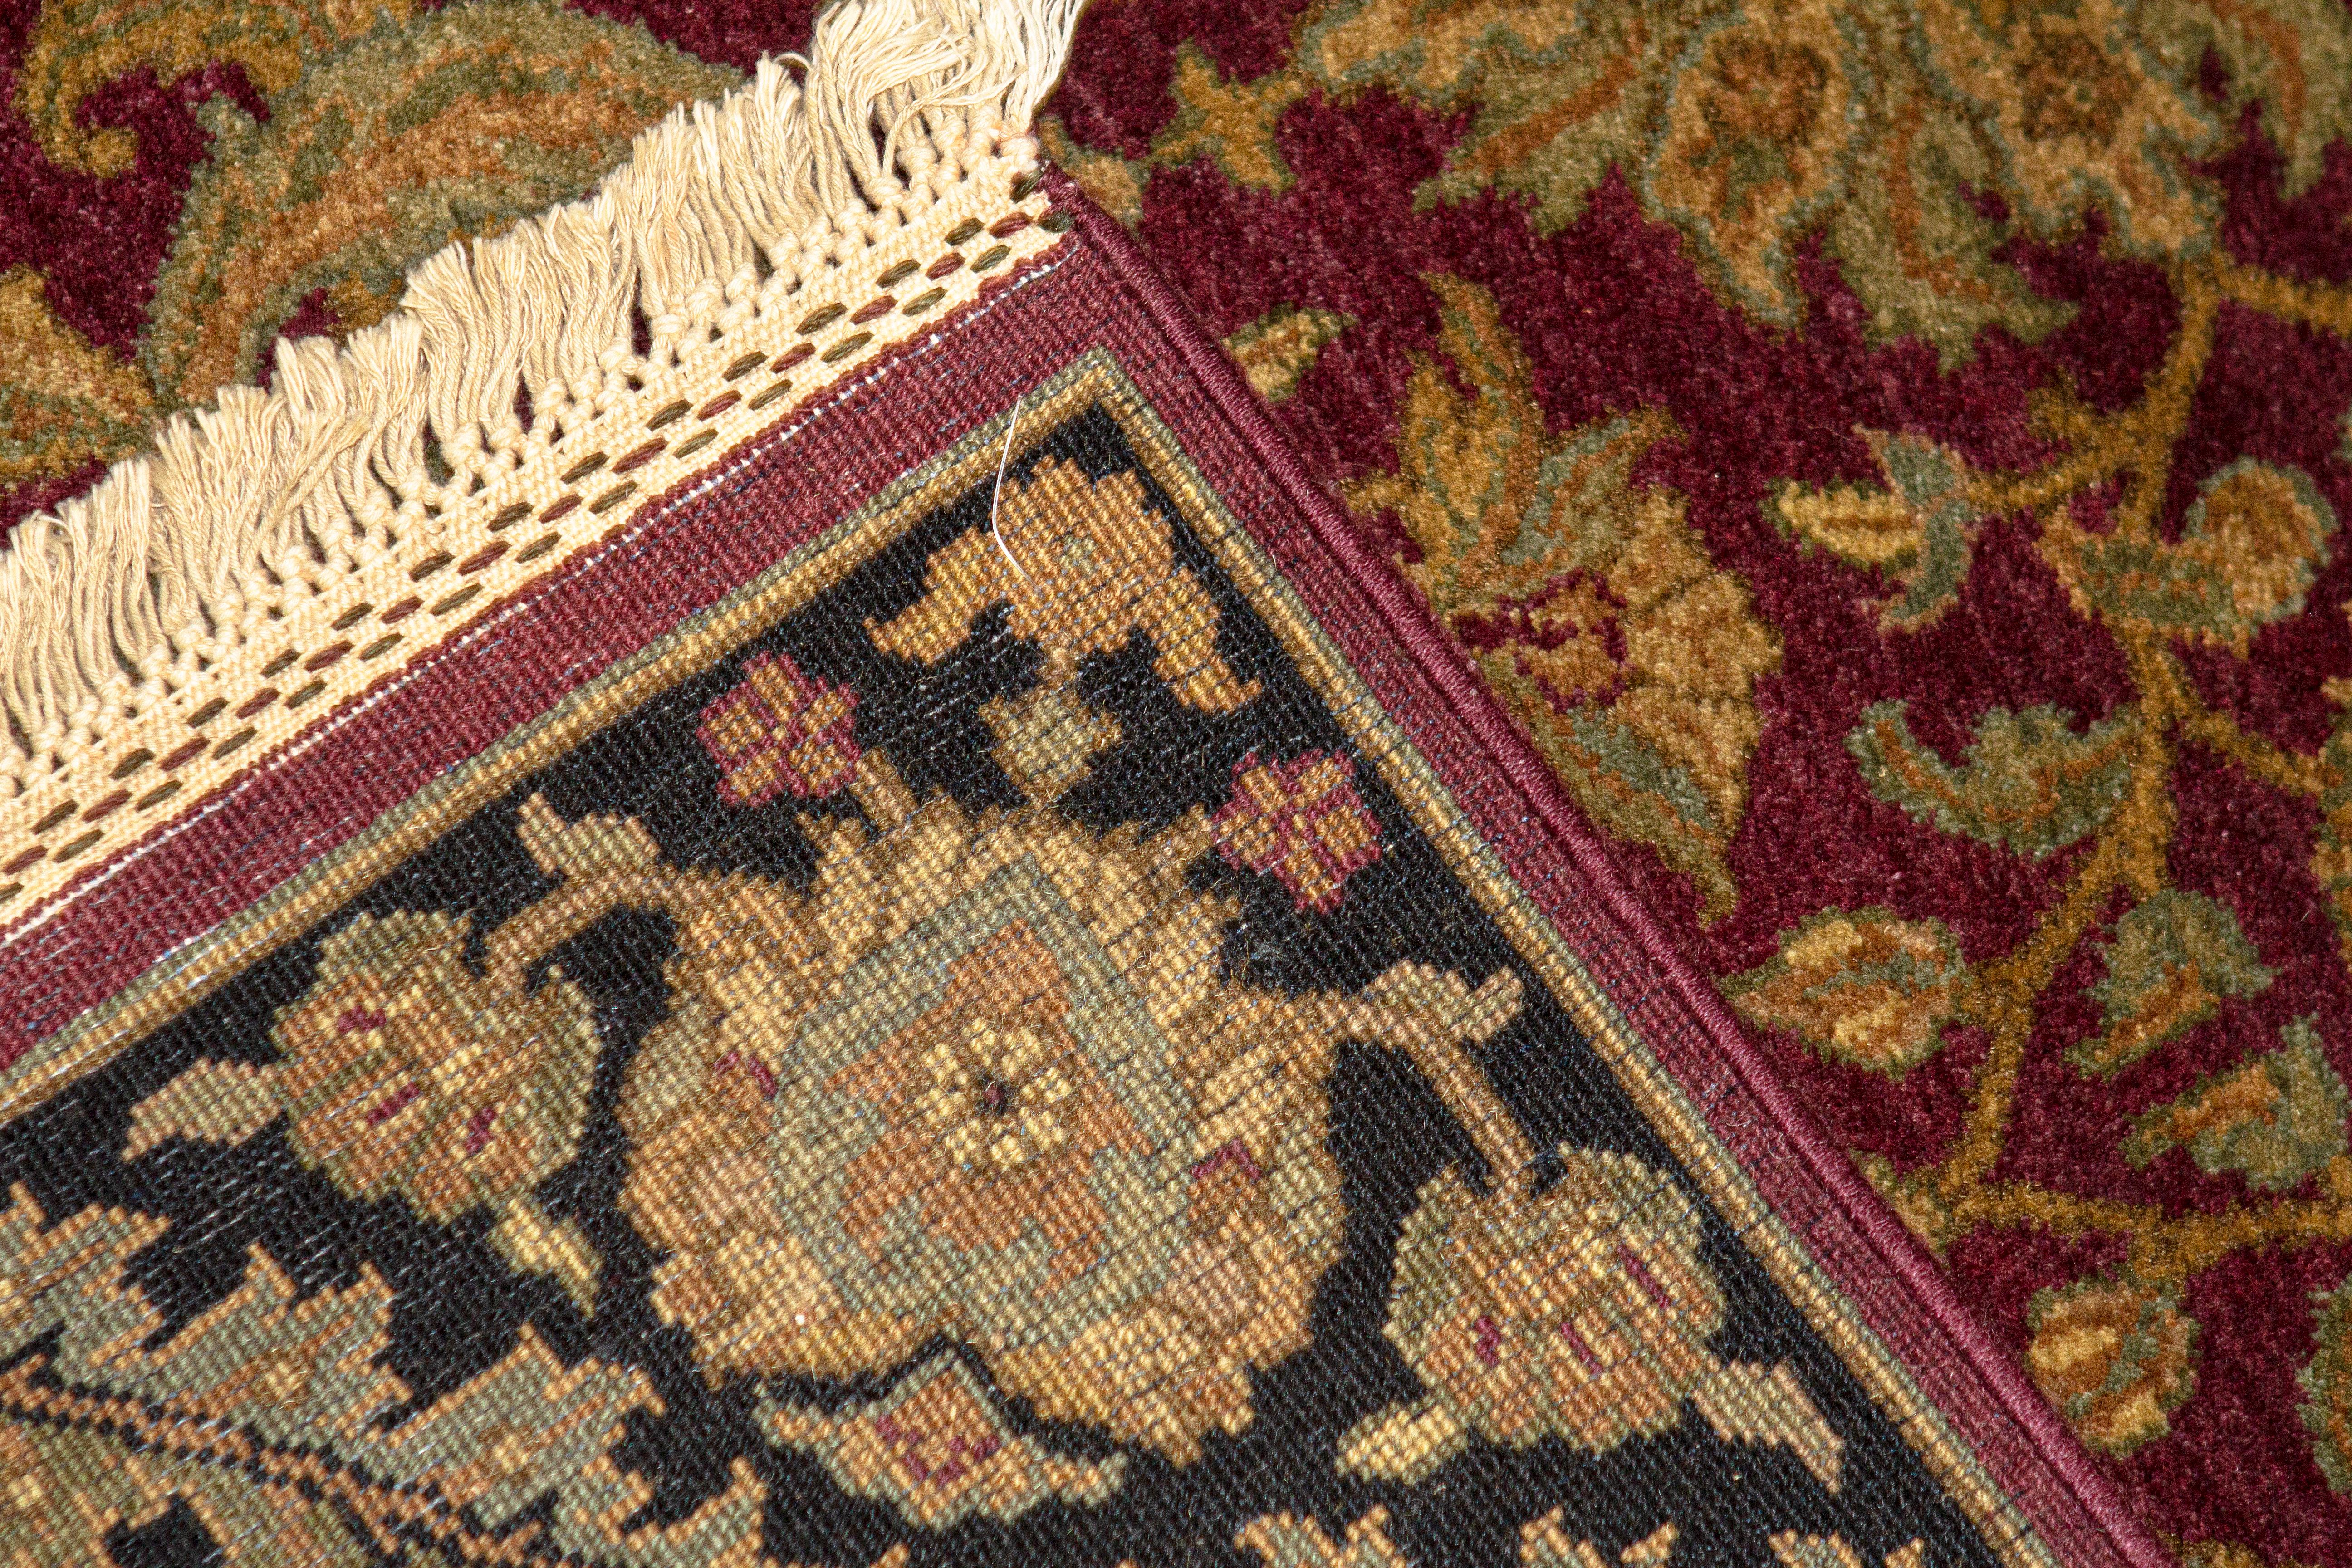 The authentic styles of traditional oriental masterpieces are recreated here, reflecting an ageless beauty in the presentation of these fine traditional handwoven rugs. Each piece is unique in representing carpets of a bygone age. The wool is from a